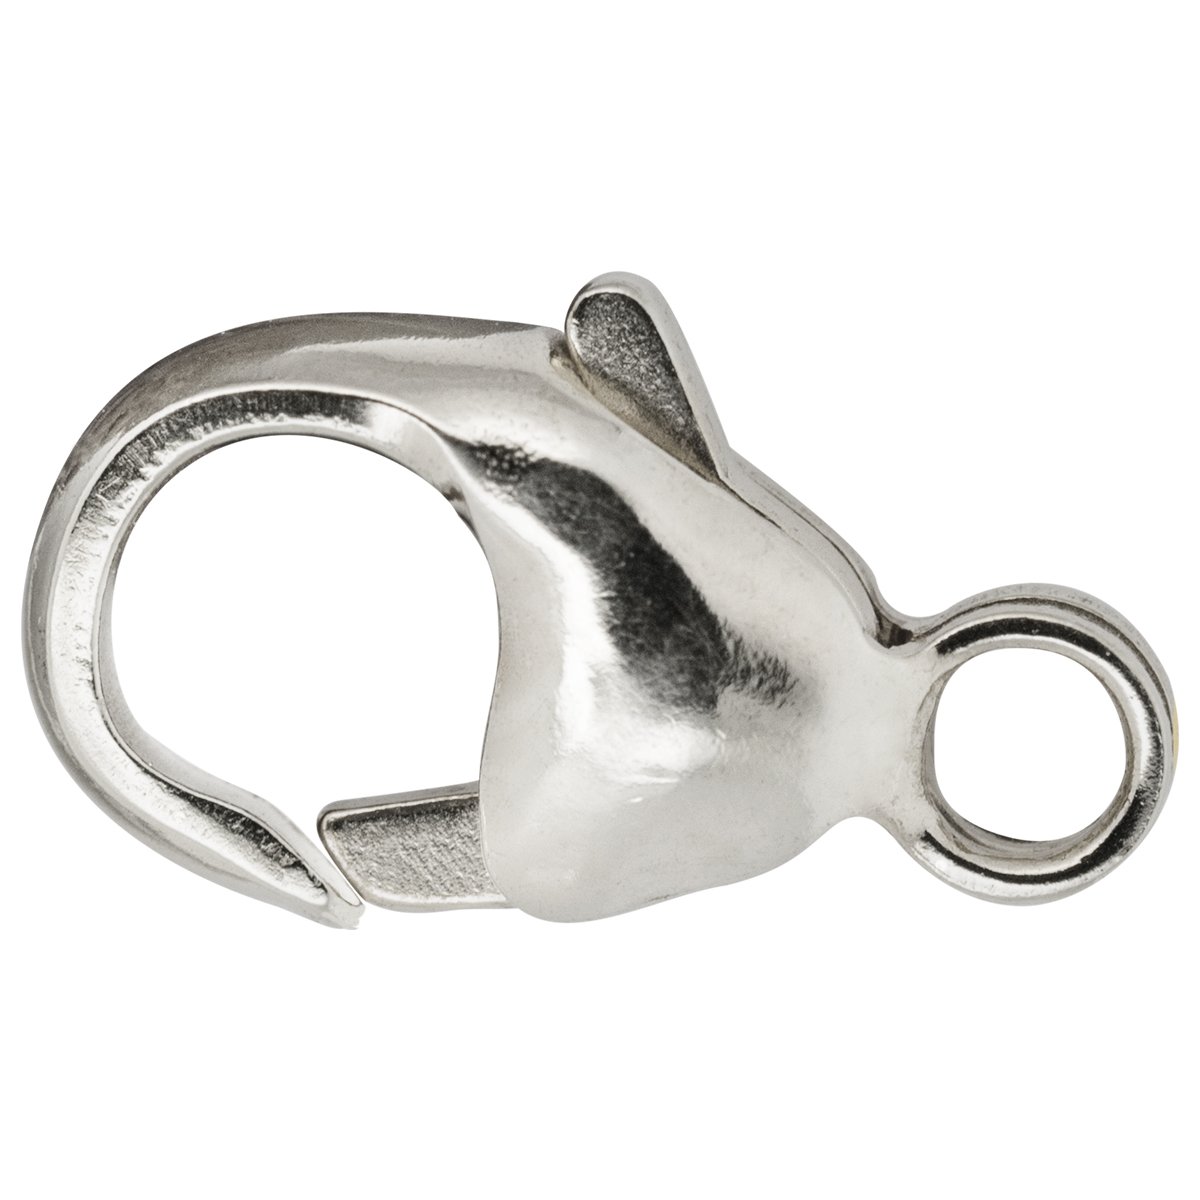 Lobster clasp, punched, domed, eyelet straight, 925/- silver, 9 mm